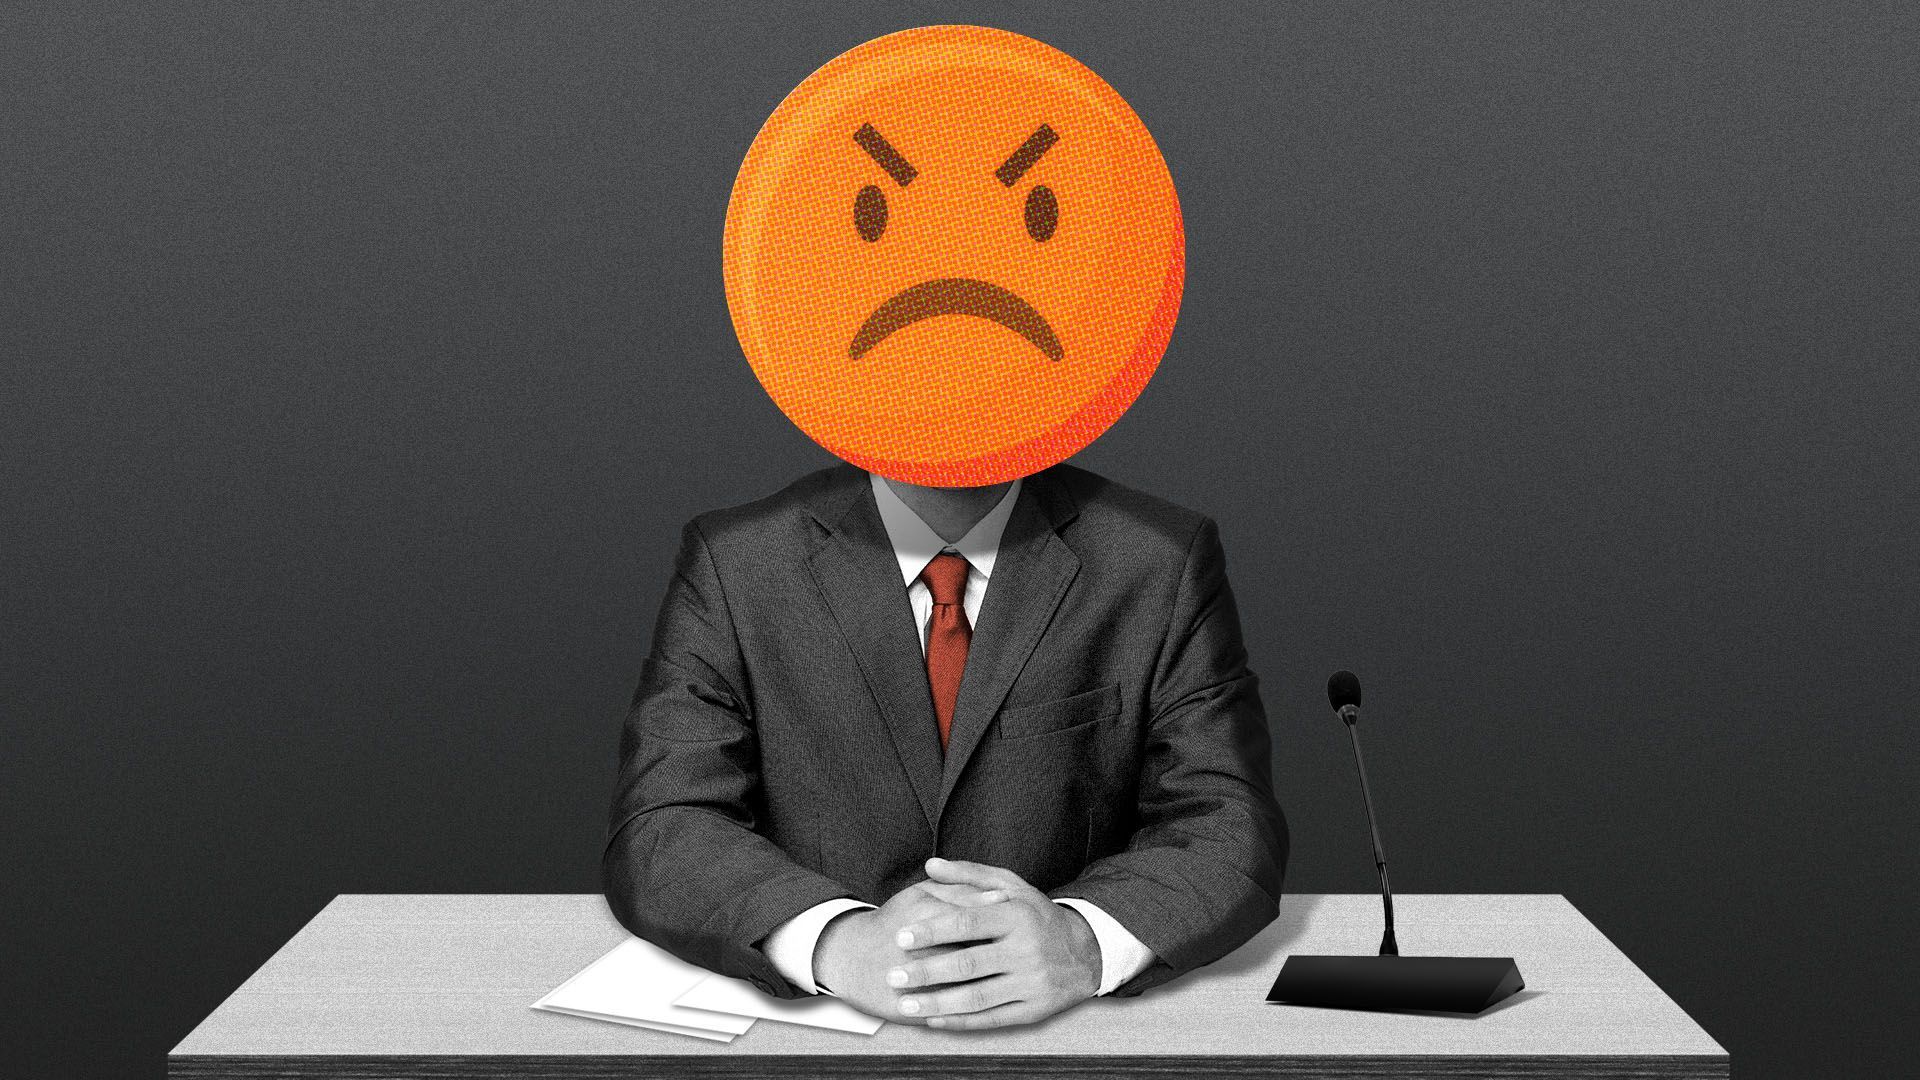 Illustration of a person testifying at a desk with an angry face emoji